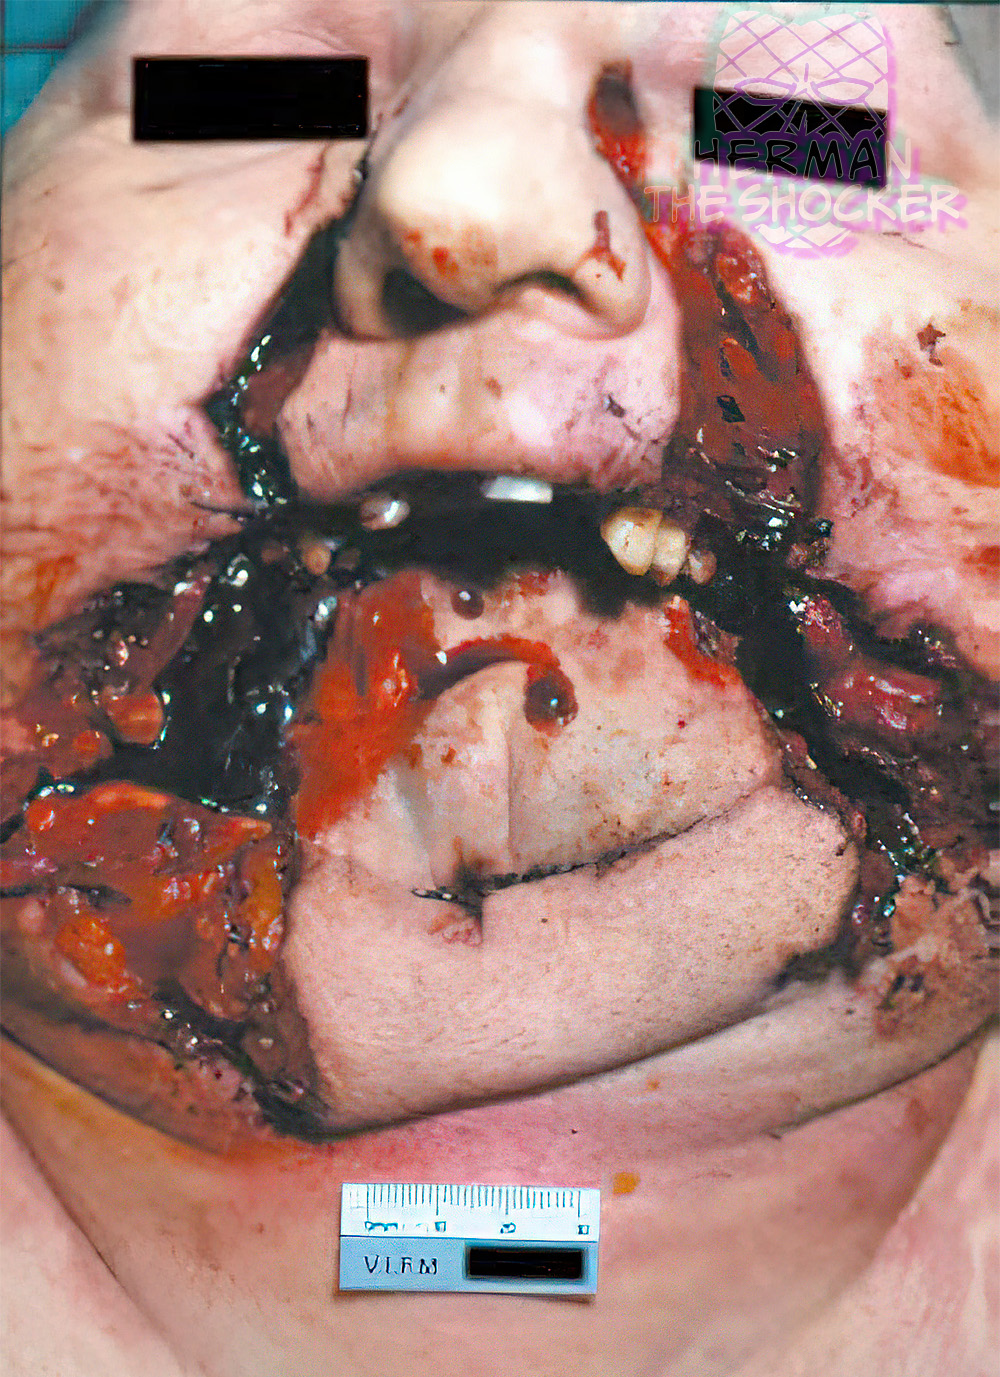 Facial splitting from an intraoral discharge